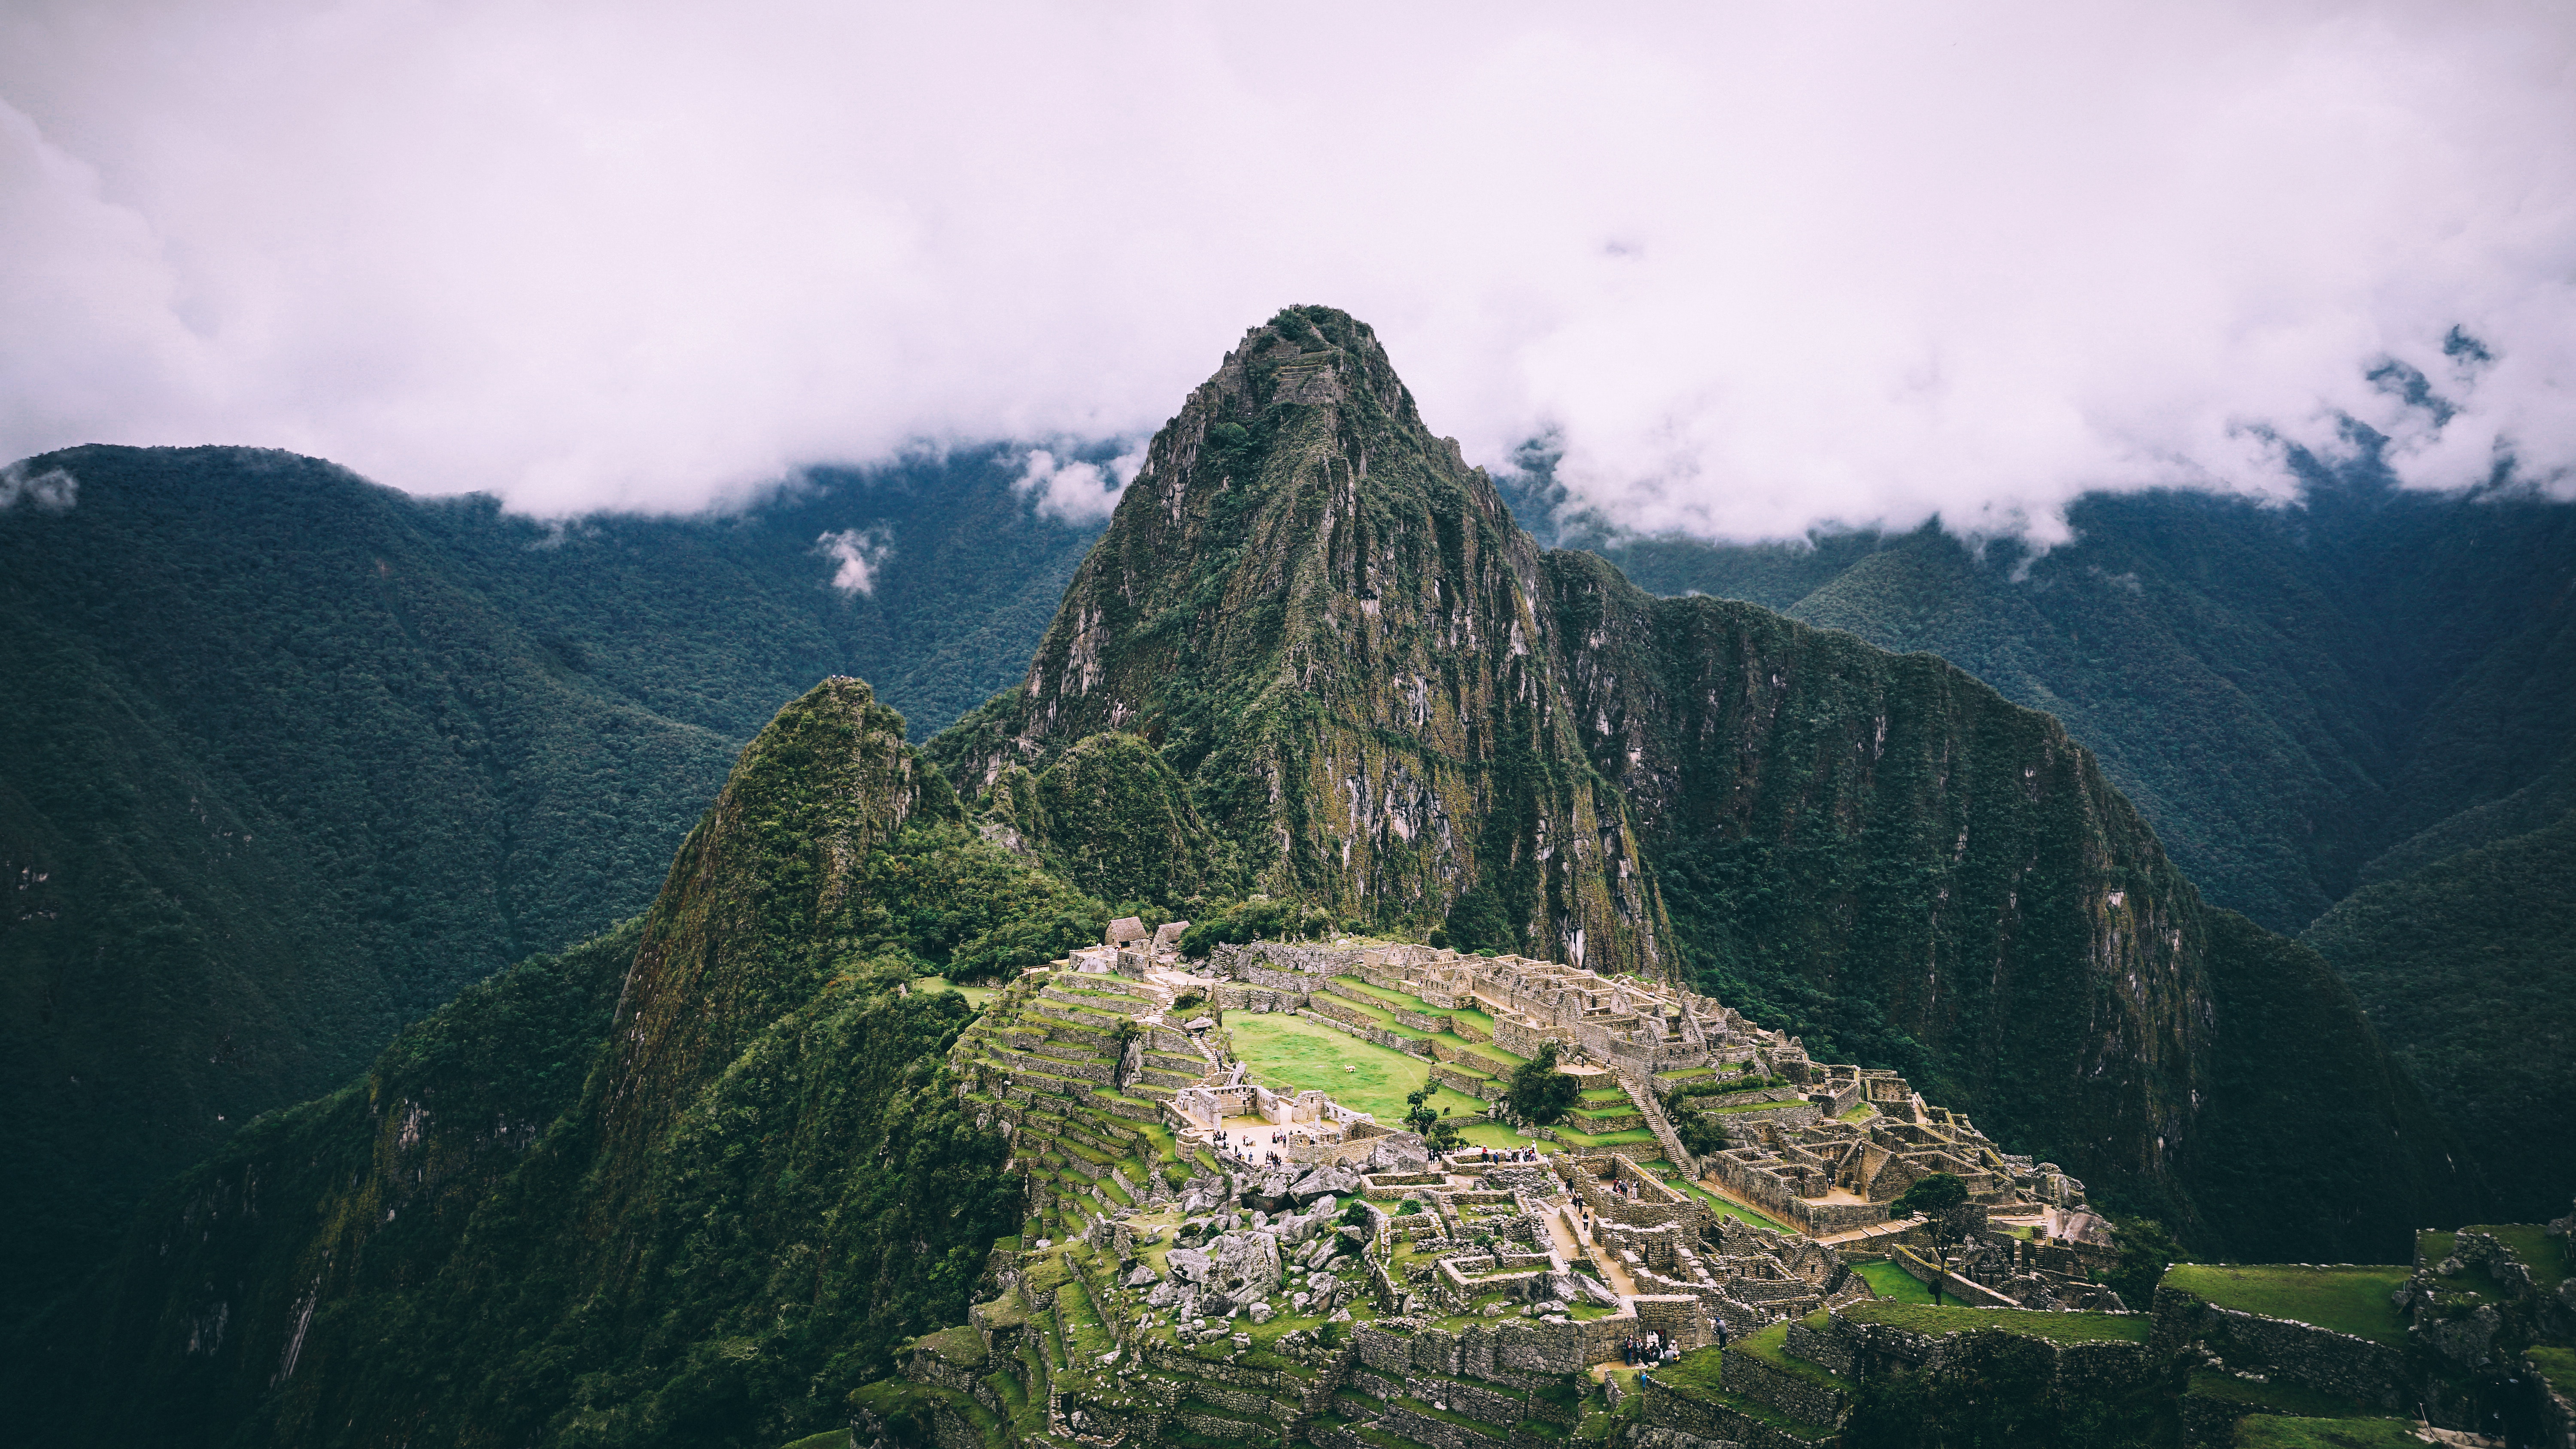 Finish your Coffee Route at the Stunning Machu Picchu